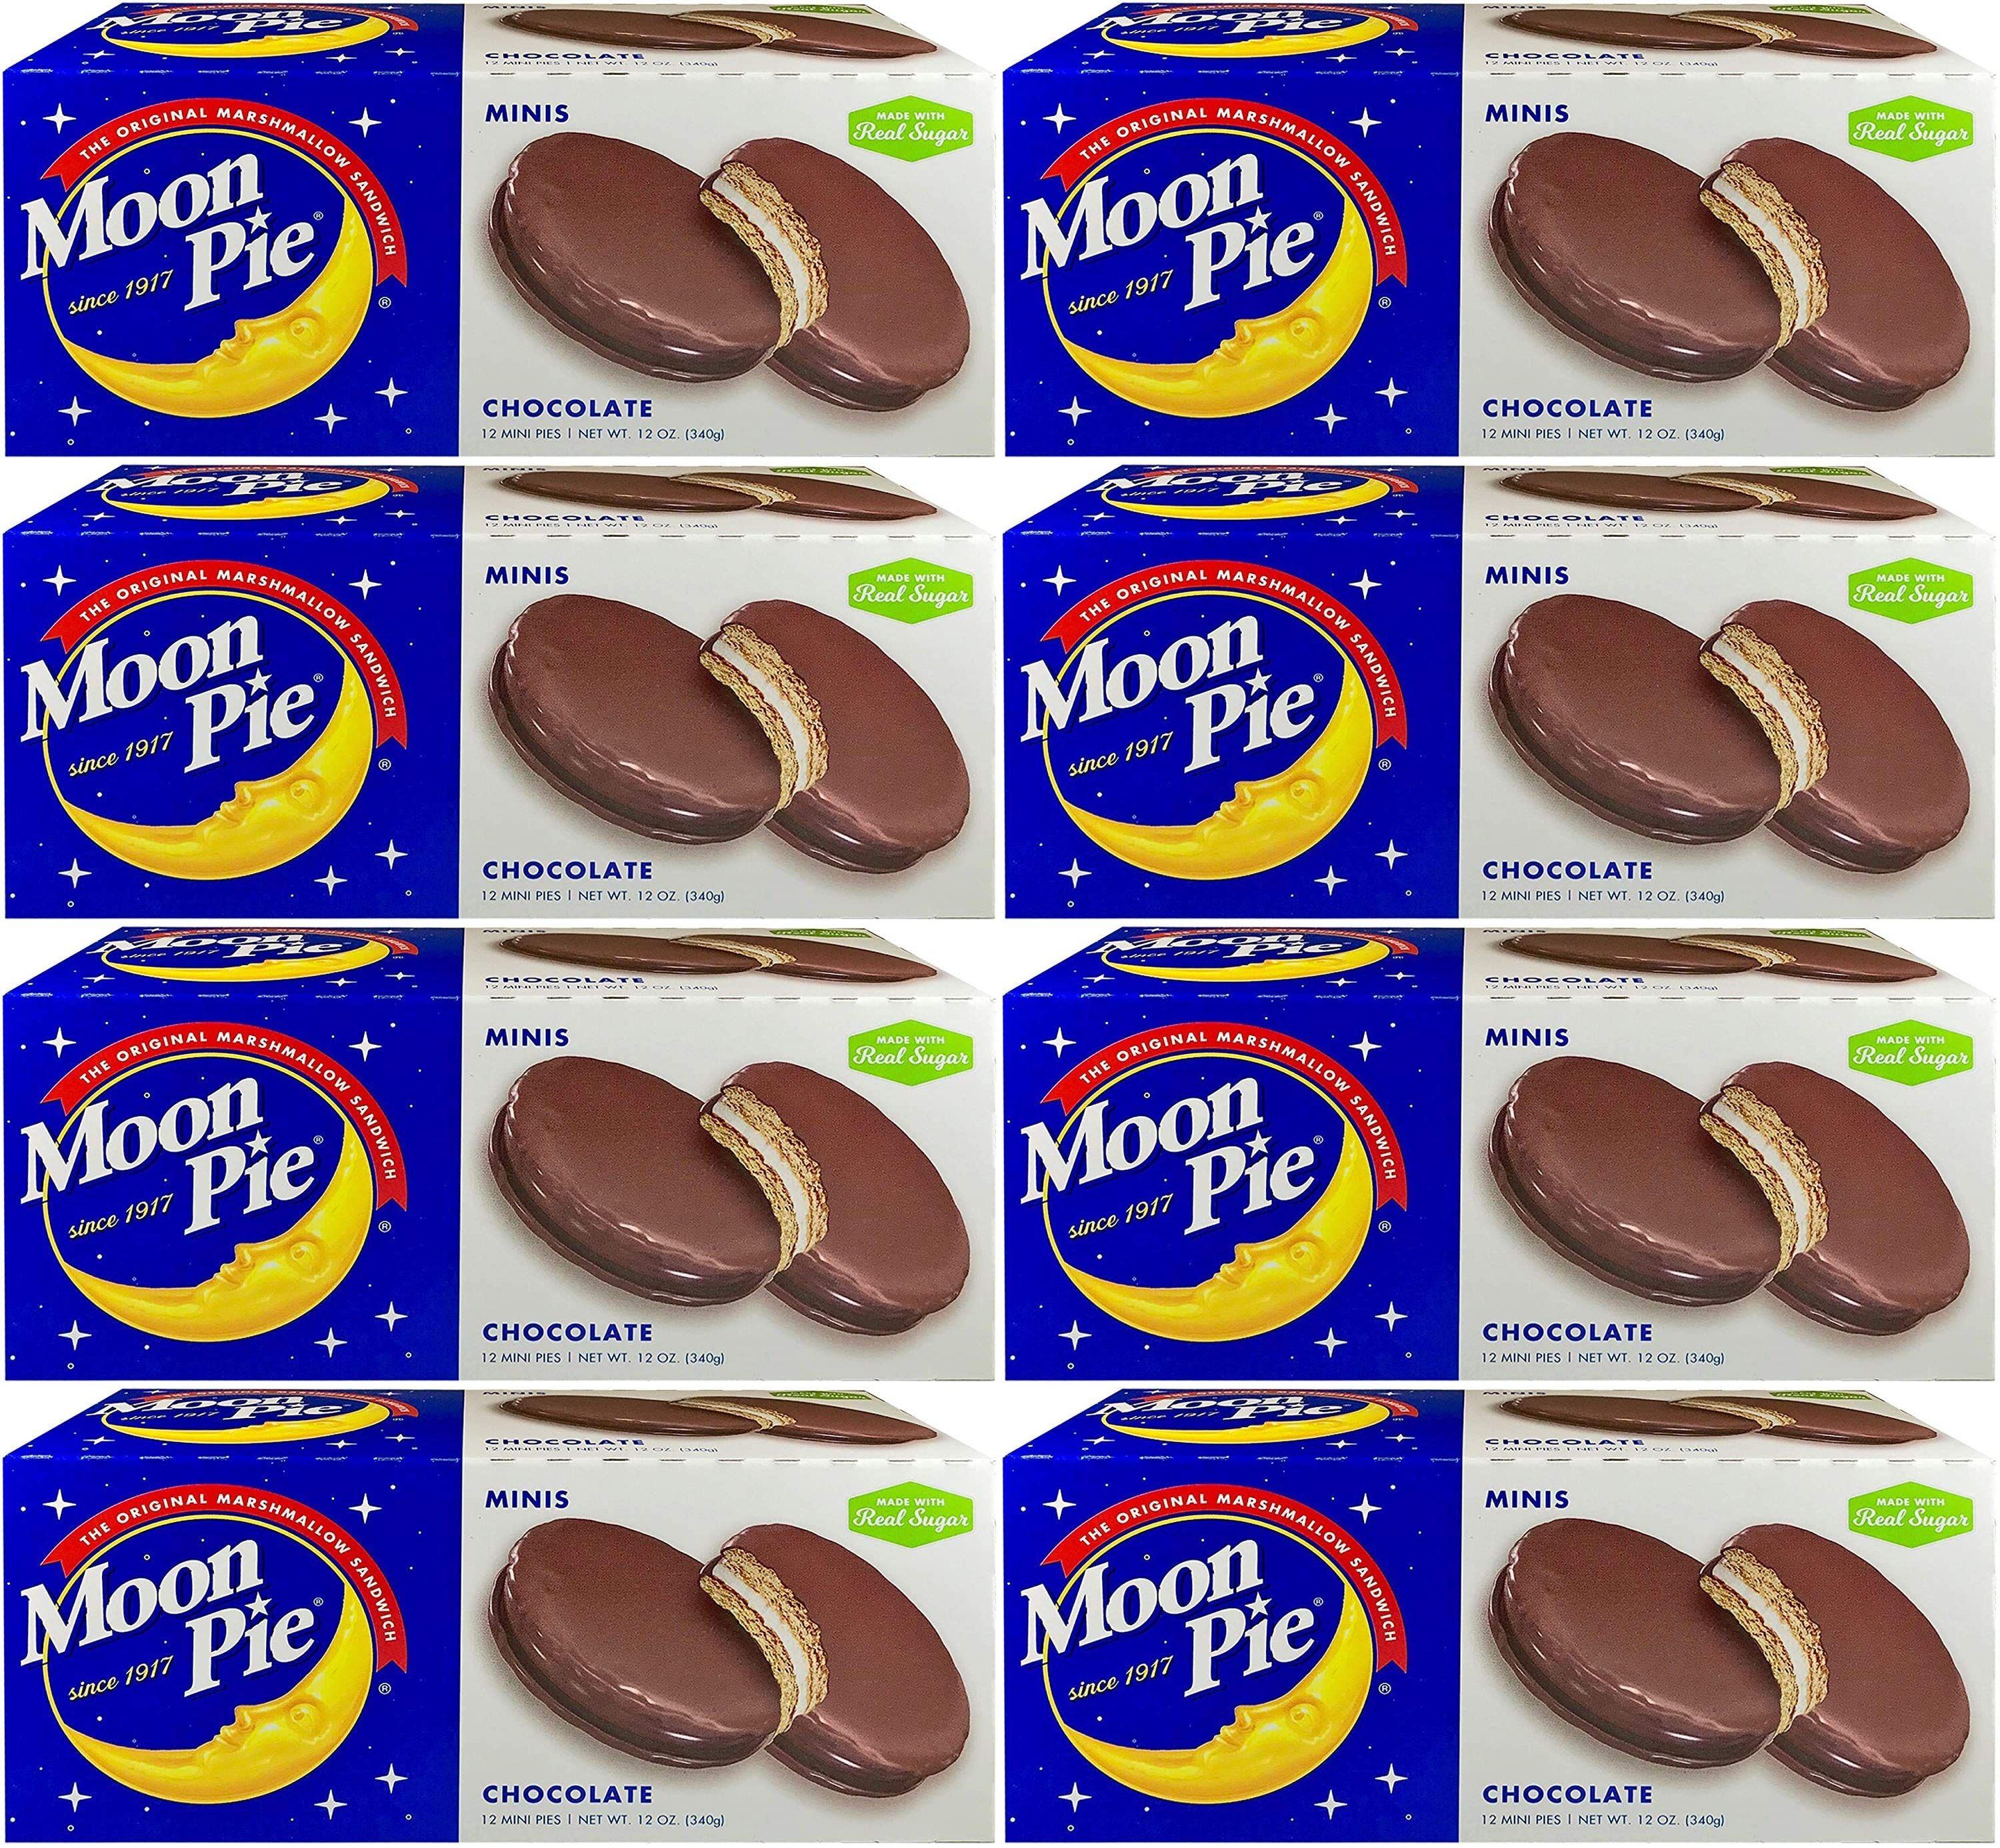 8-Pack 12-Count MoonPie Mini Chocolate Marshmallow Sandwich $17.97 ($0.19 Each) + Free Shipping w/ Prime or on $35+